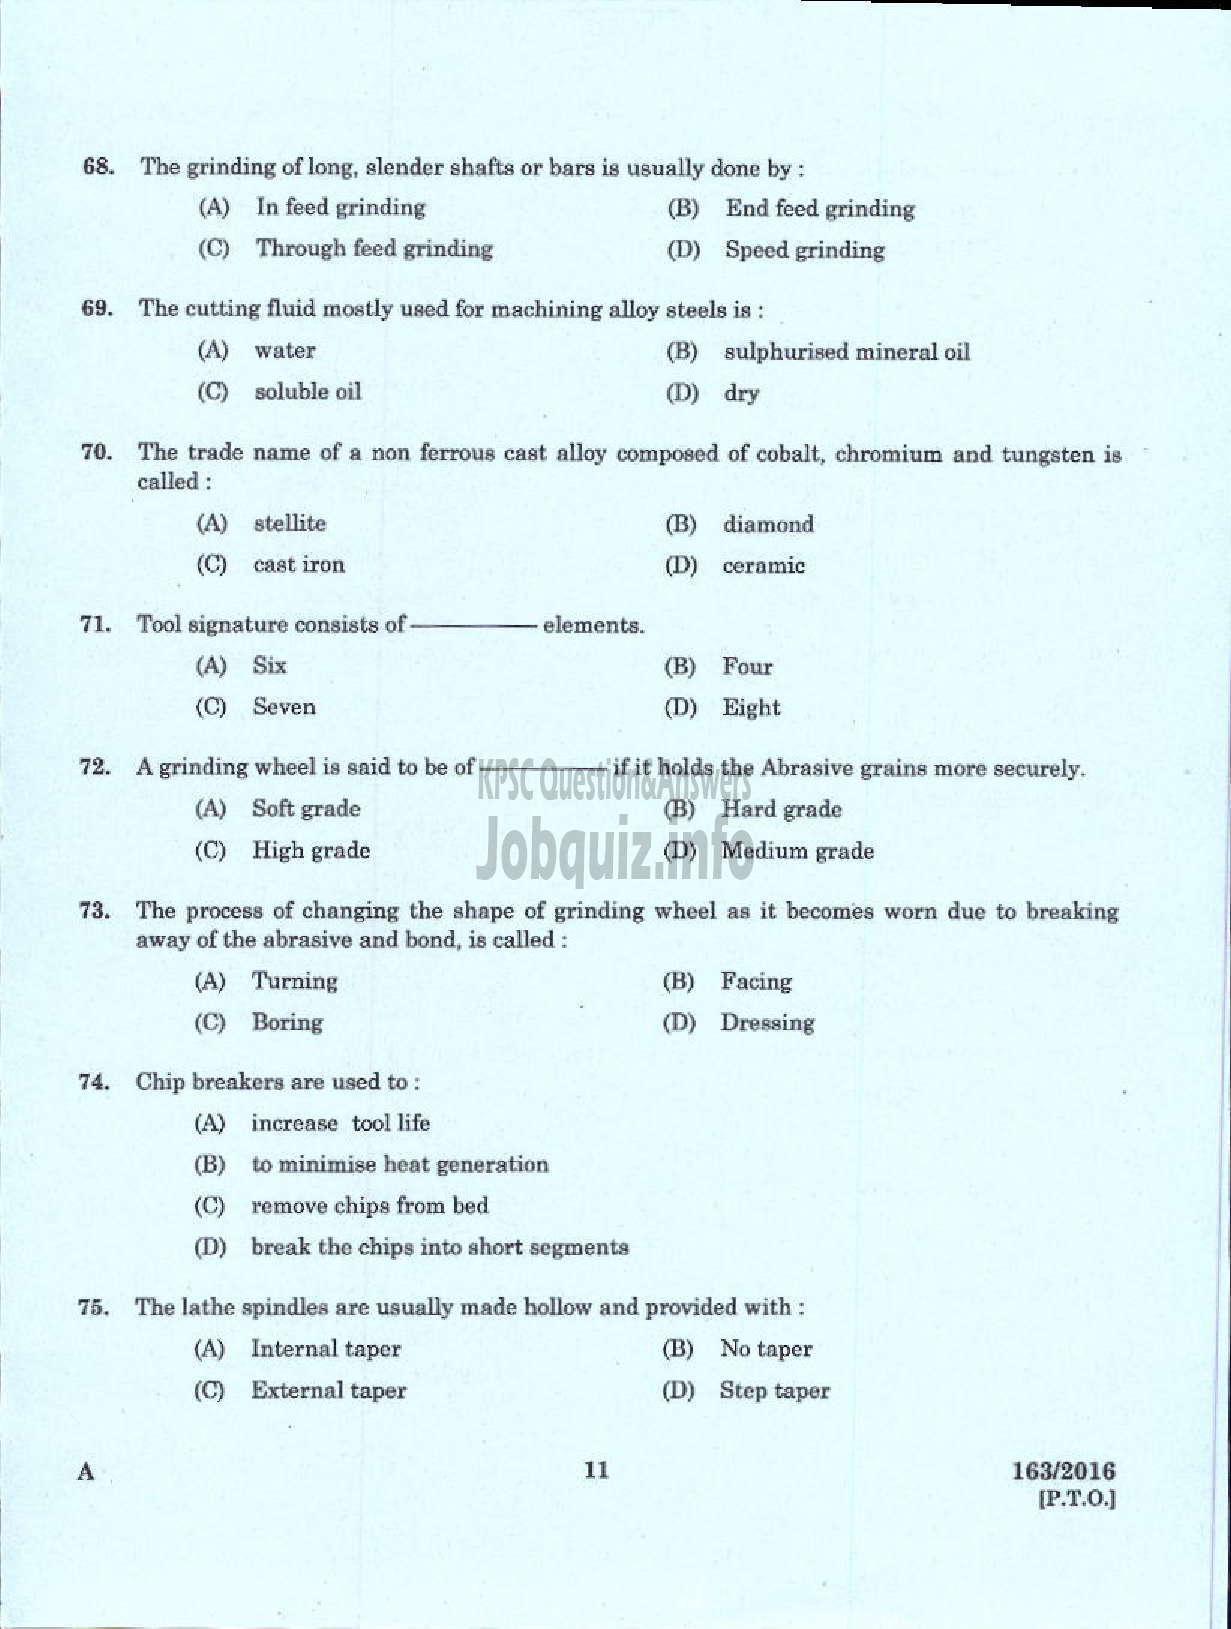 Kerala PSC Question Paper - TRADESMAN TURNING TECHNICAL EDUCATION-9